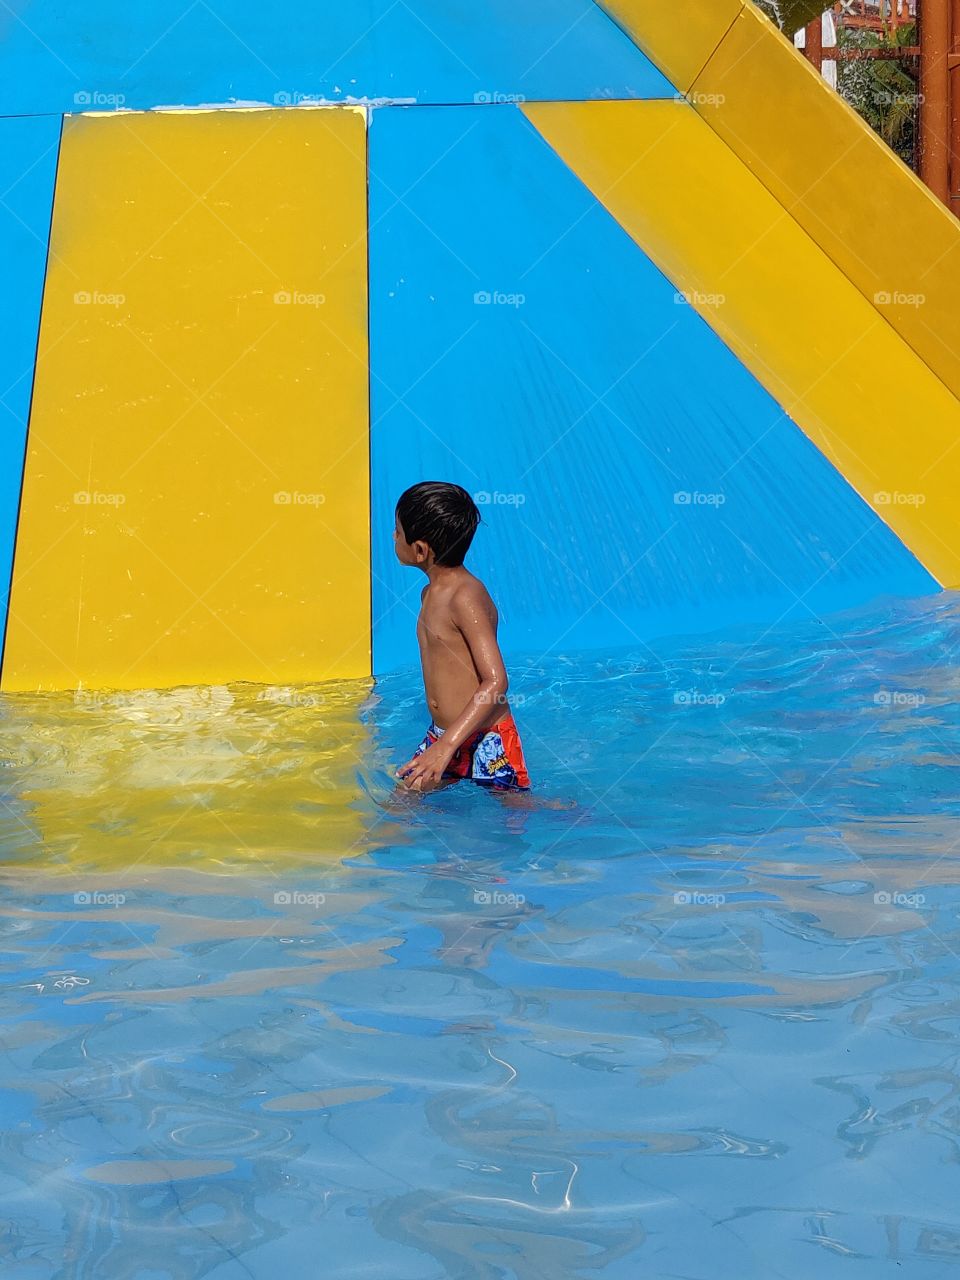 small kid inside water in an amusement park or water park in summer